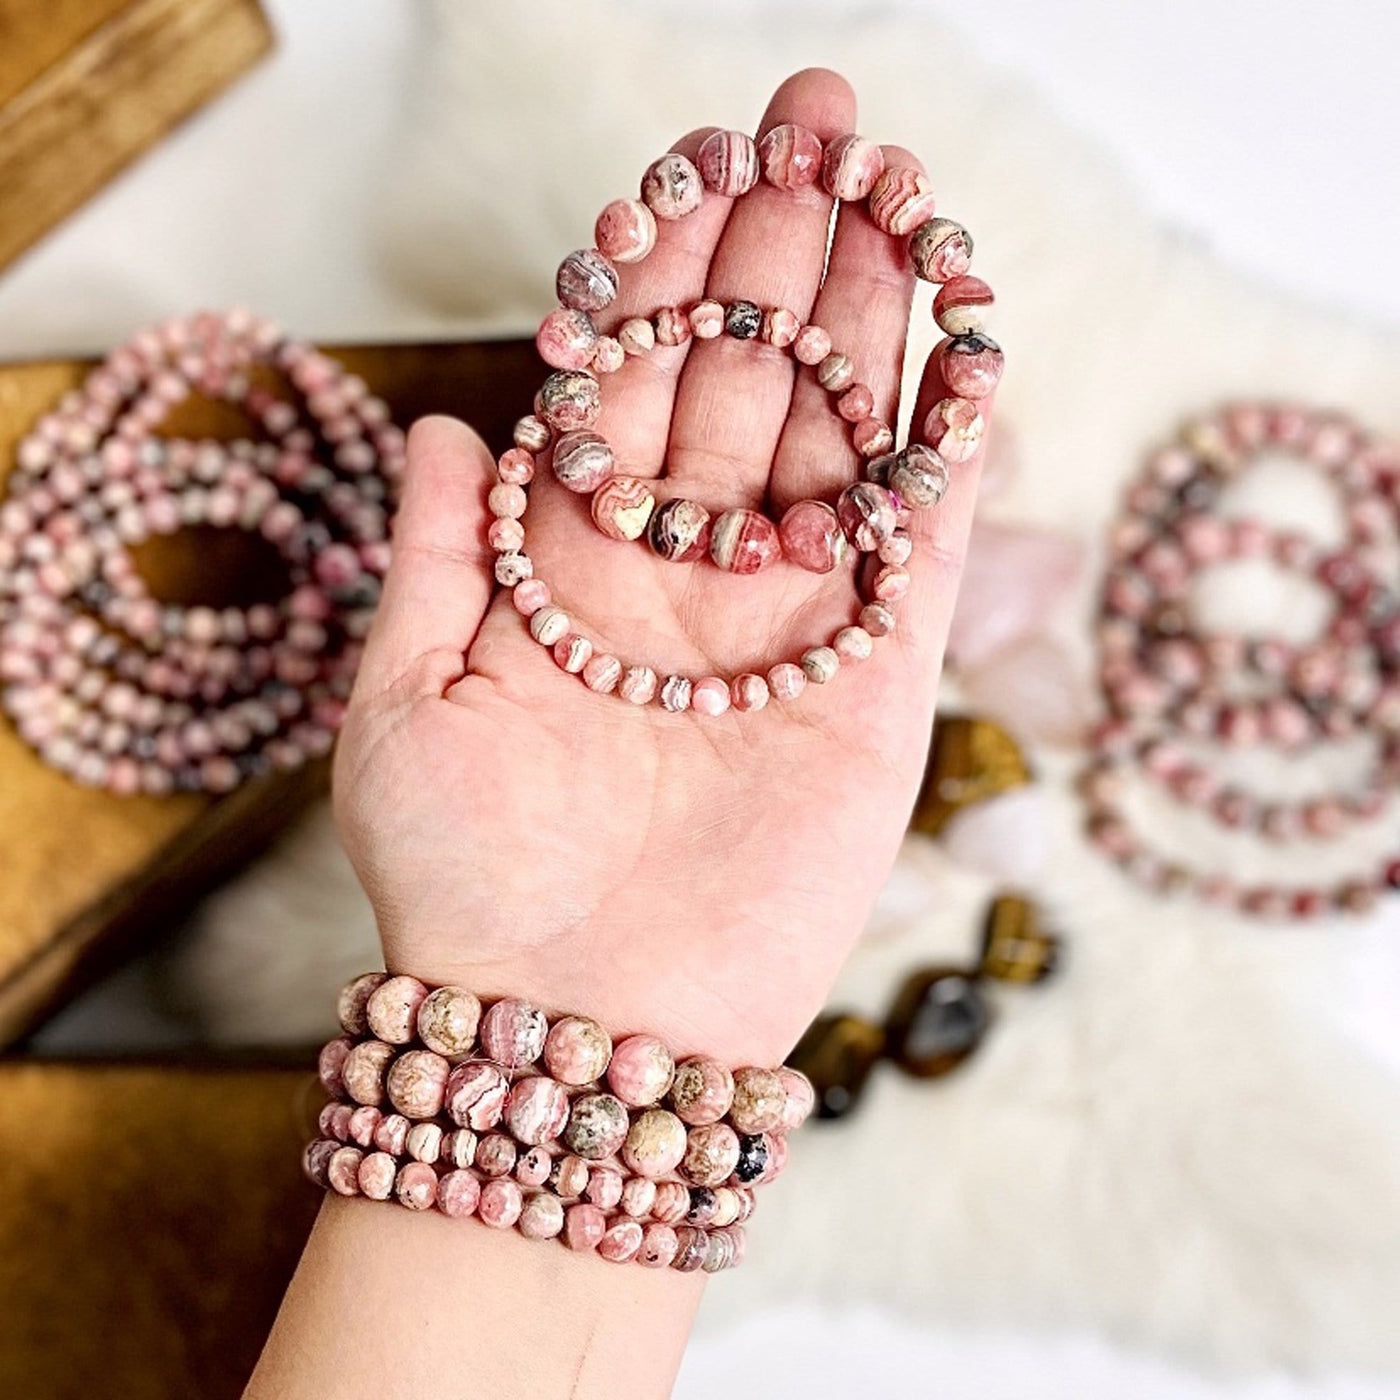 Hand wearing Rhodochrosite Round Bead Bracelets and holding up 2 more bracelets with more blurred in the background